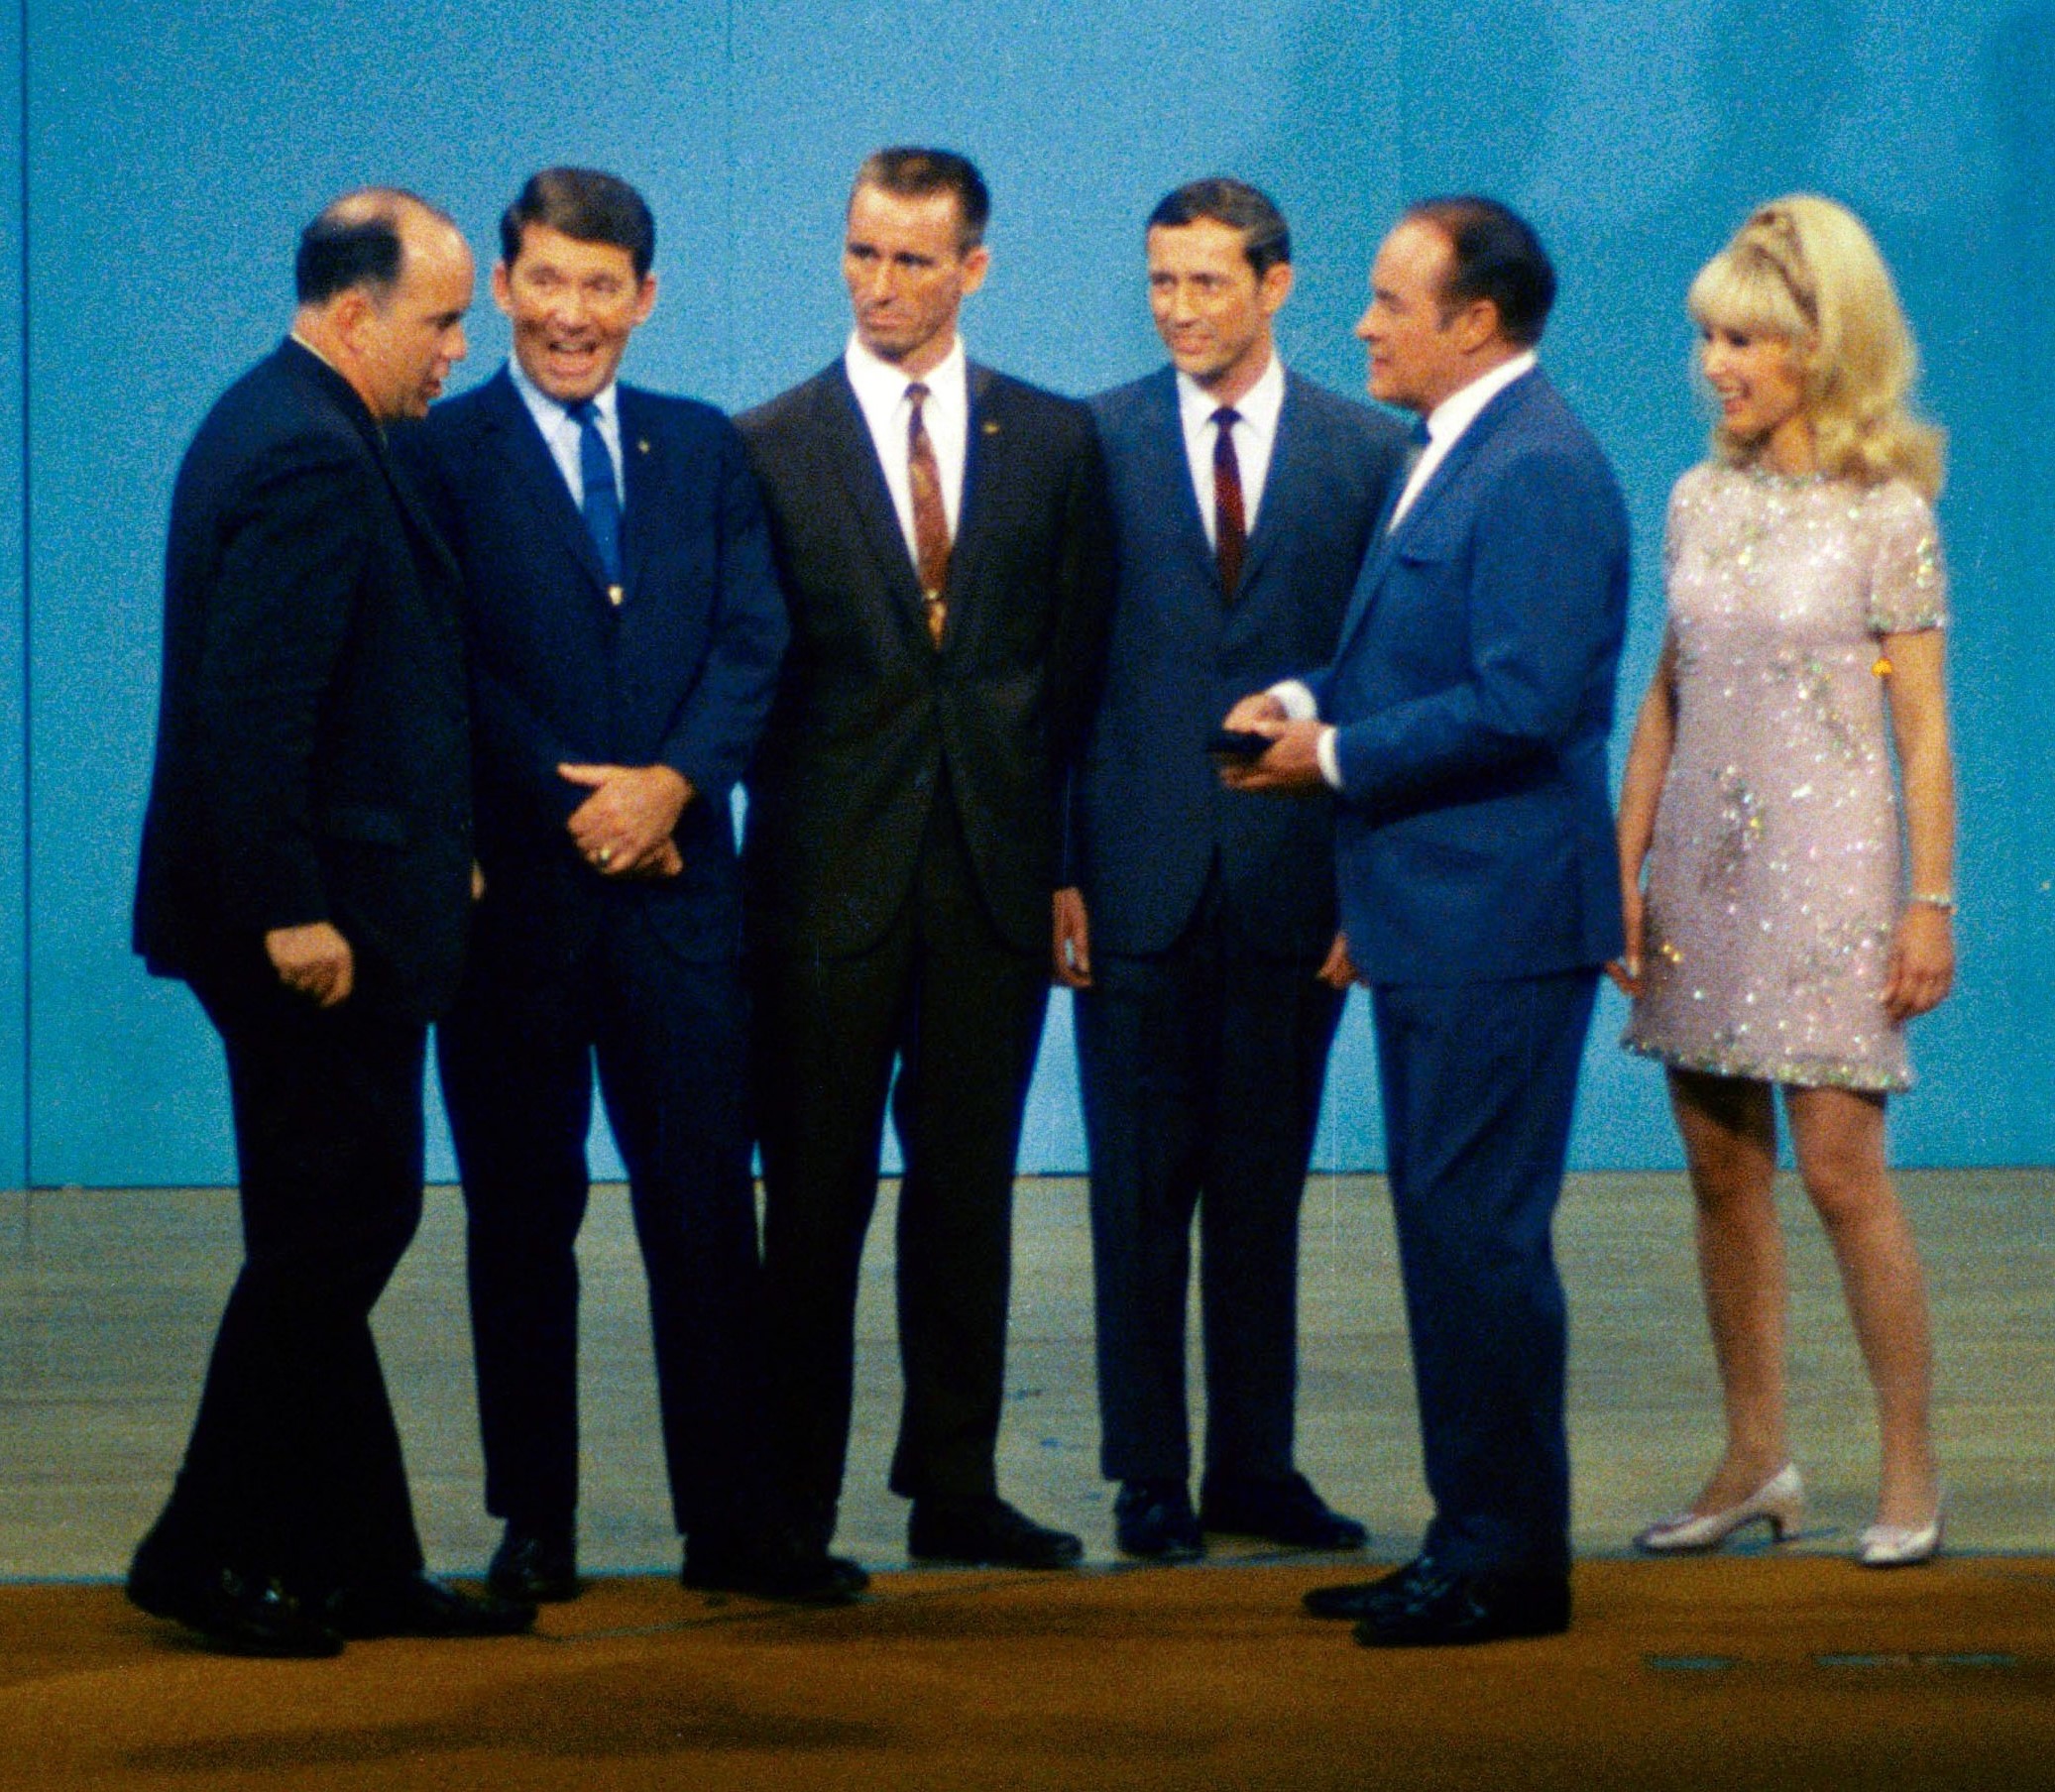 Entertainer Bob Hope, second from right, taped an episode of his show at the Manned Spacecraft Center, now NASA’s Johnson Space Center in Houston, with guests the “Voice of Mission Control” Paul P. Haney, left, Apollo 7 astronauts Schirra, Cunningham, and Eisele, and television star Barbara Eden